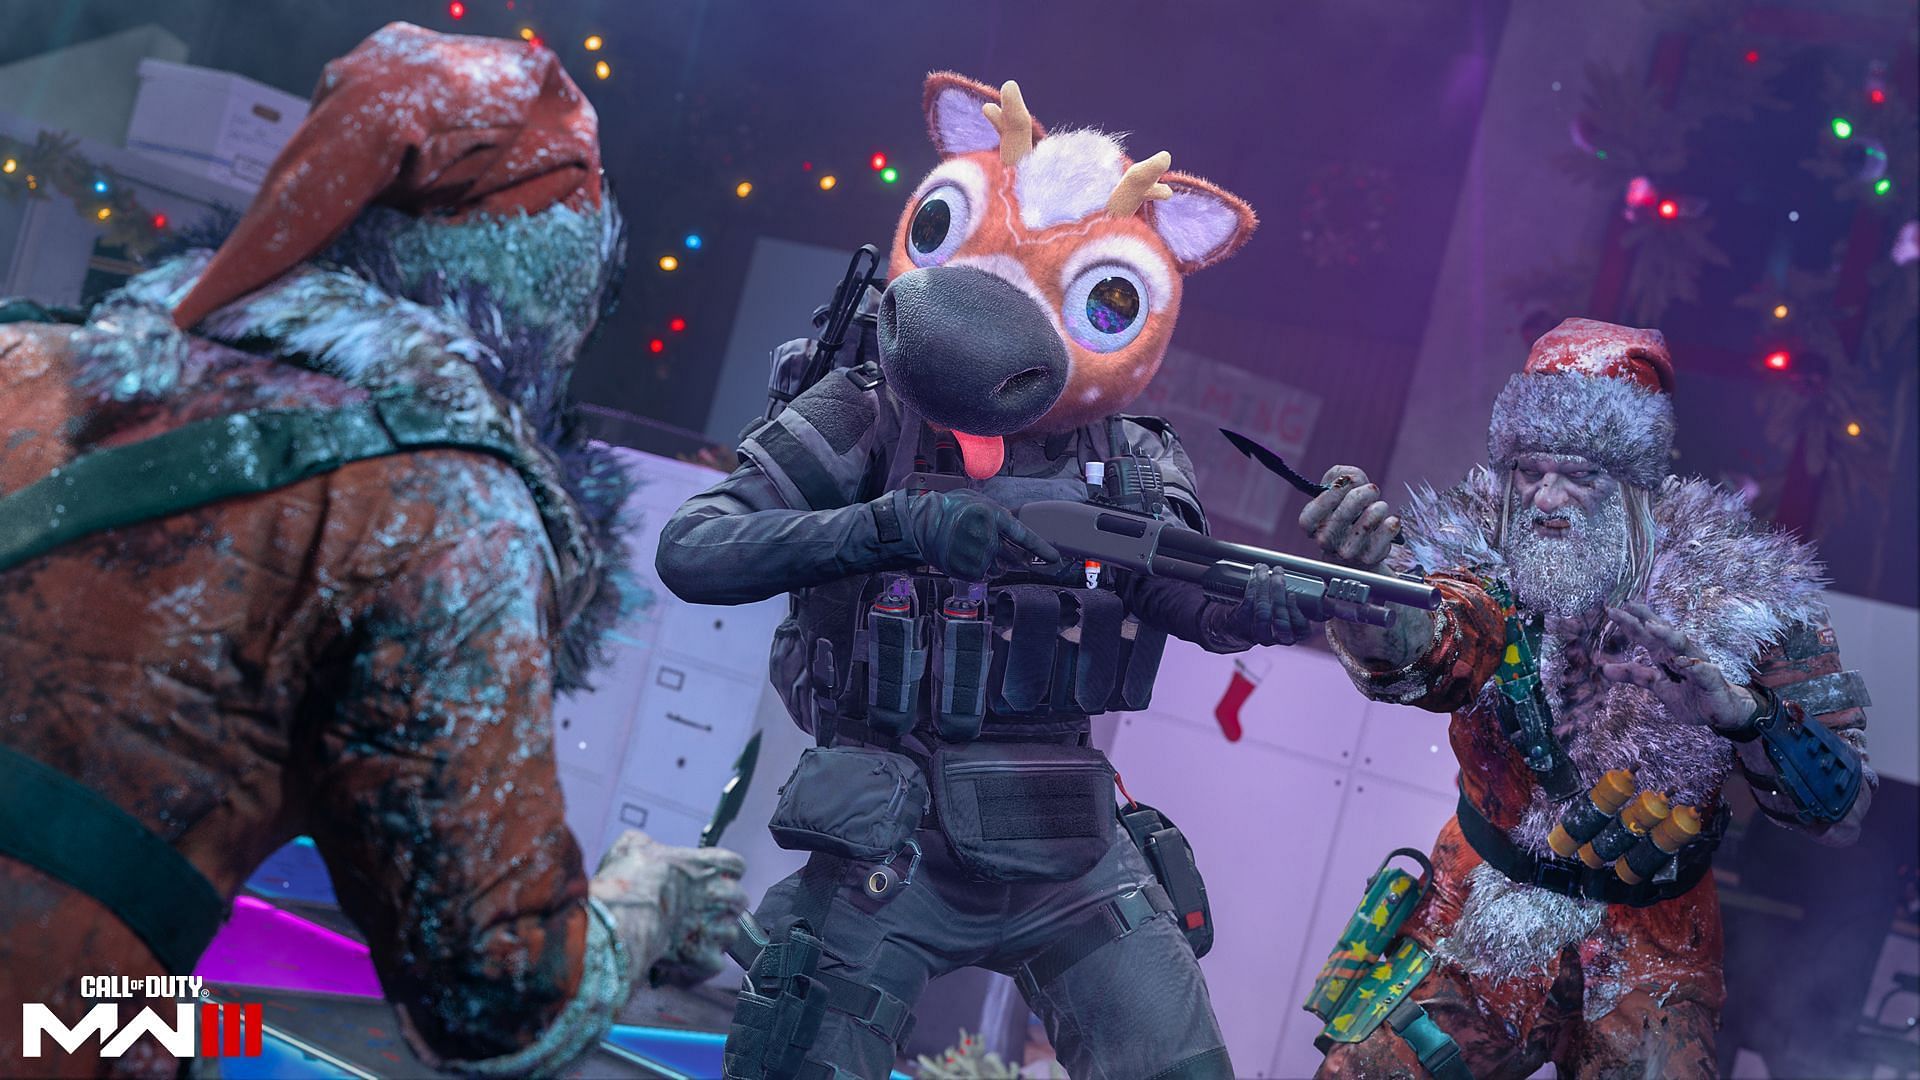 Two Zombie Santa Operators with knives trying to fight a player holding a Shotgun